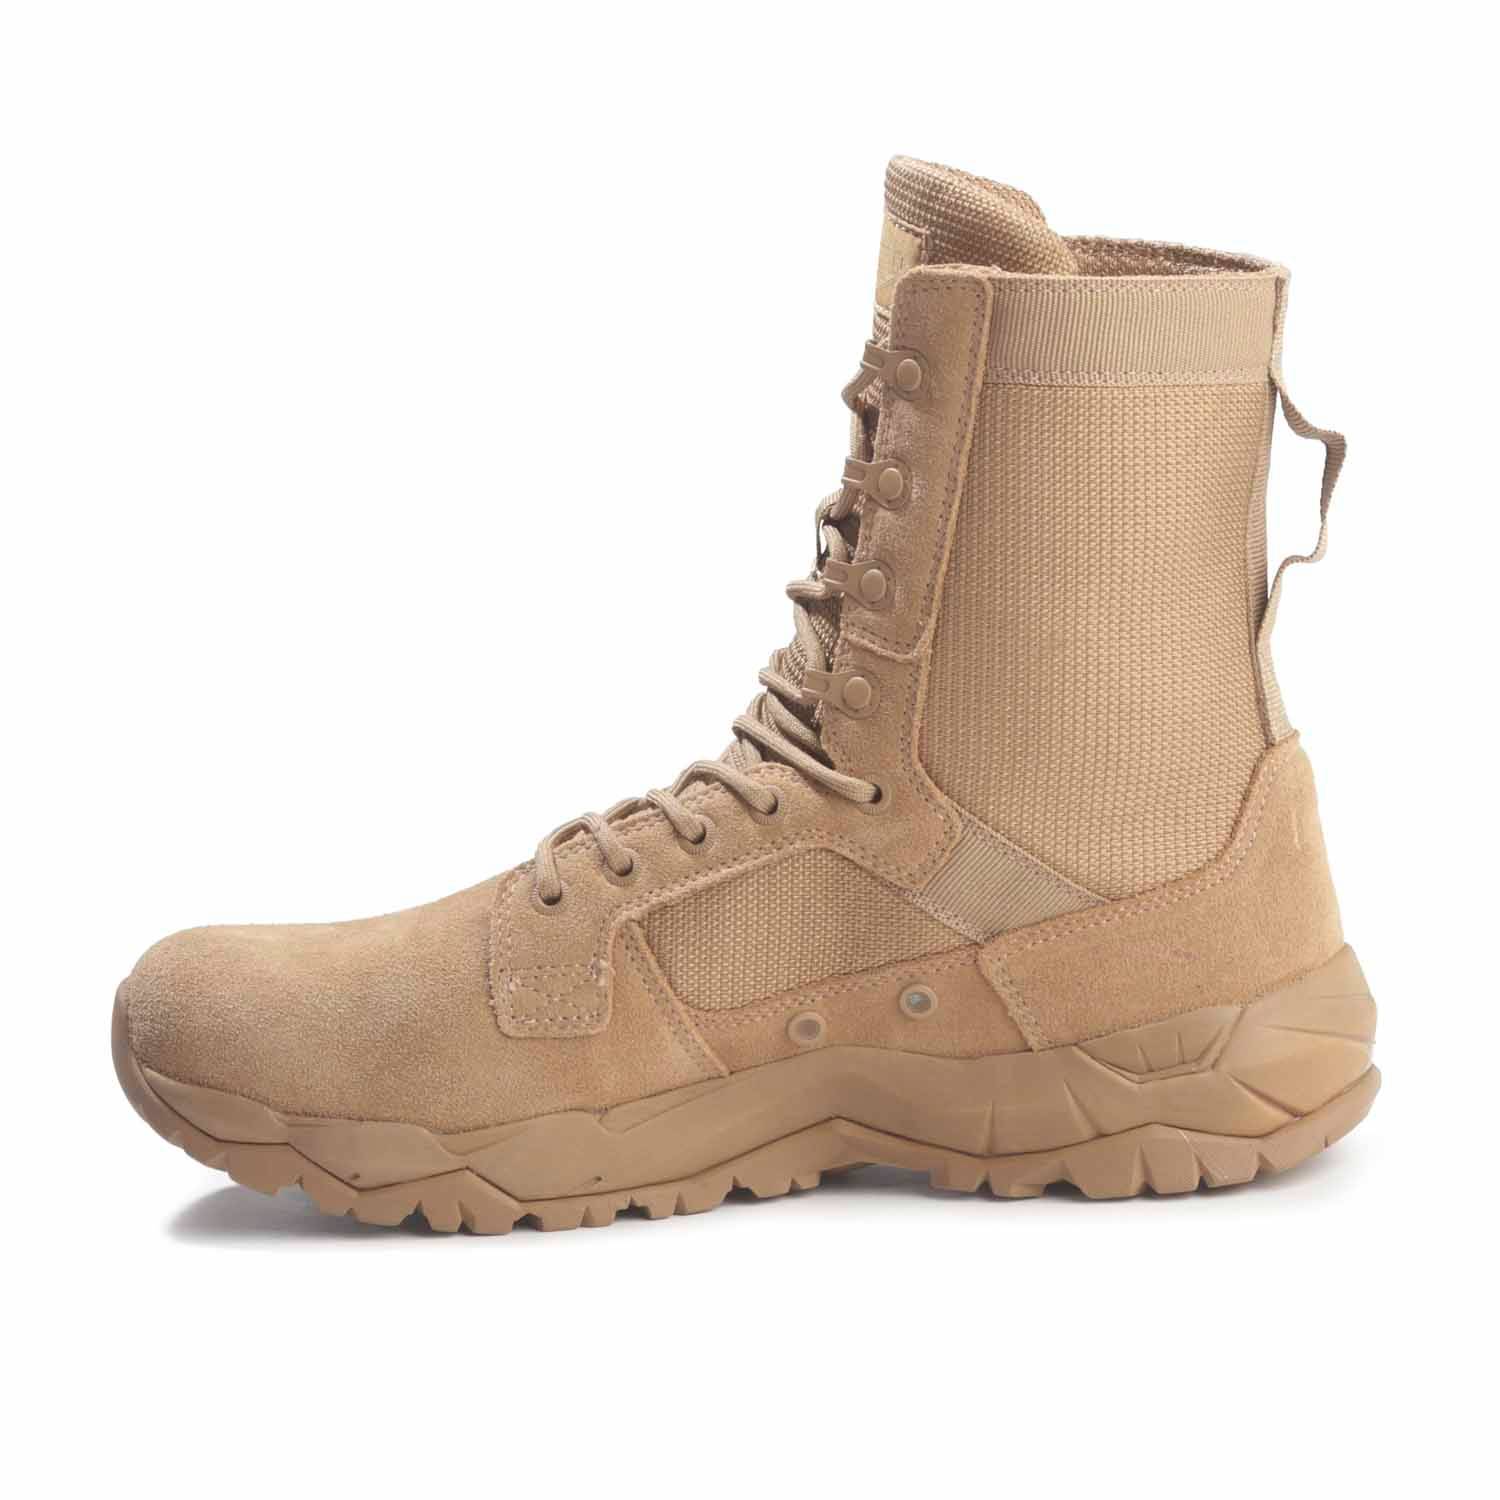 Merrell MQC Tactical Boot | AR670-1 Approved Boot